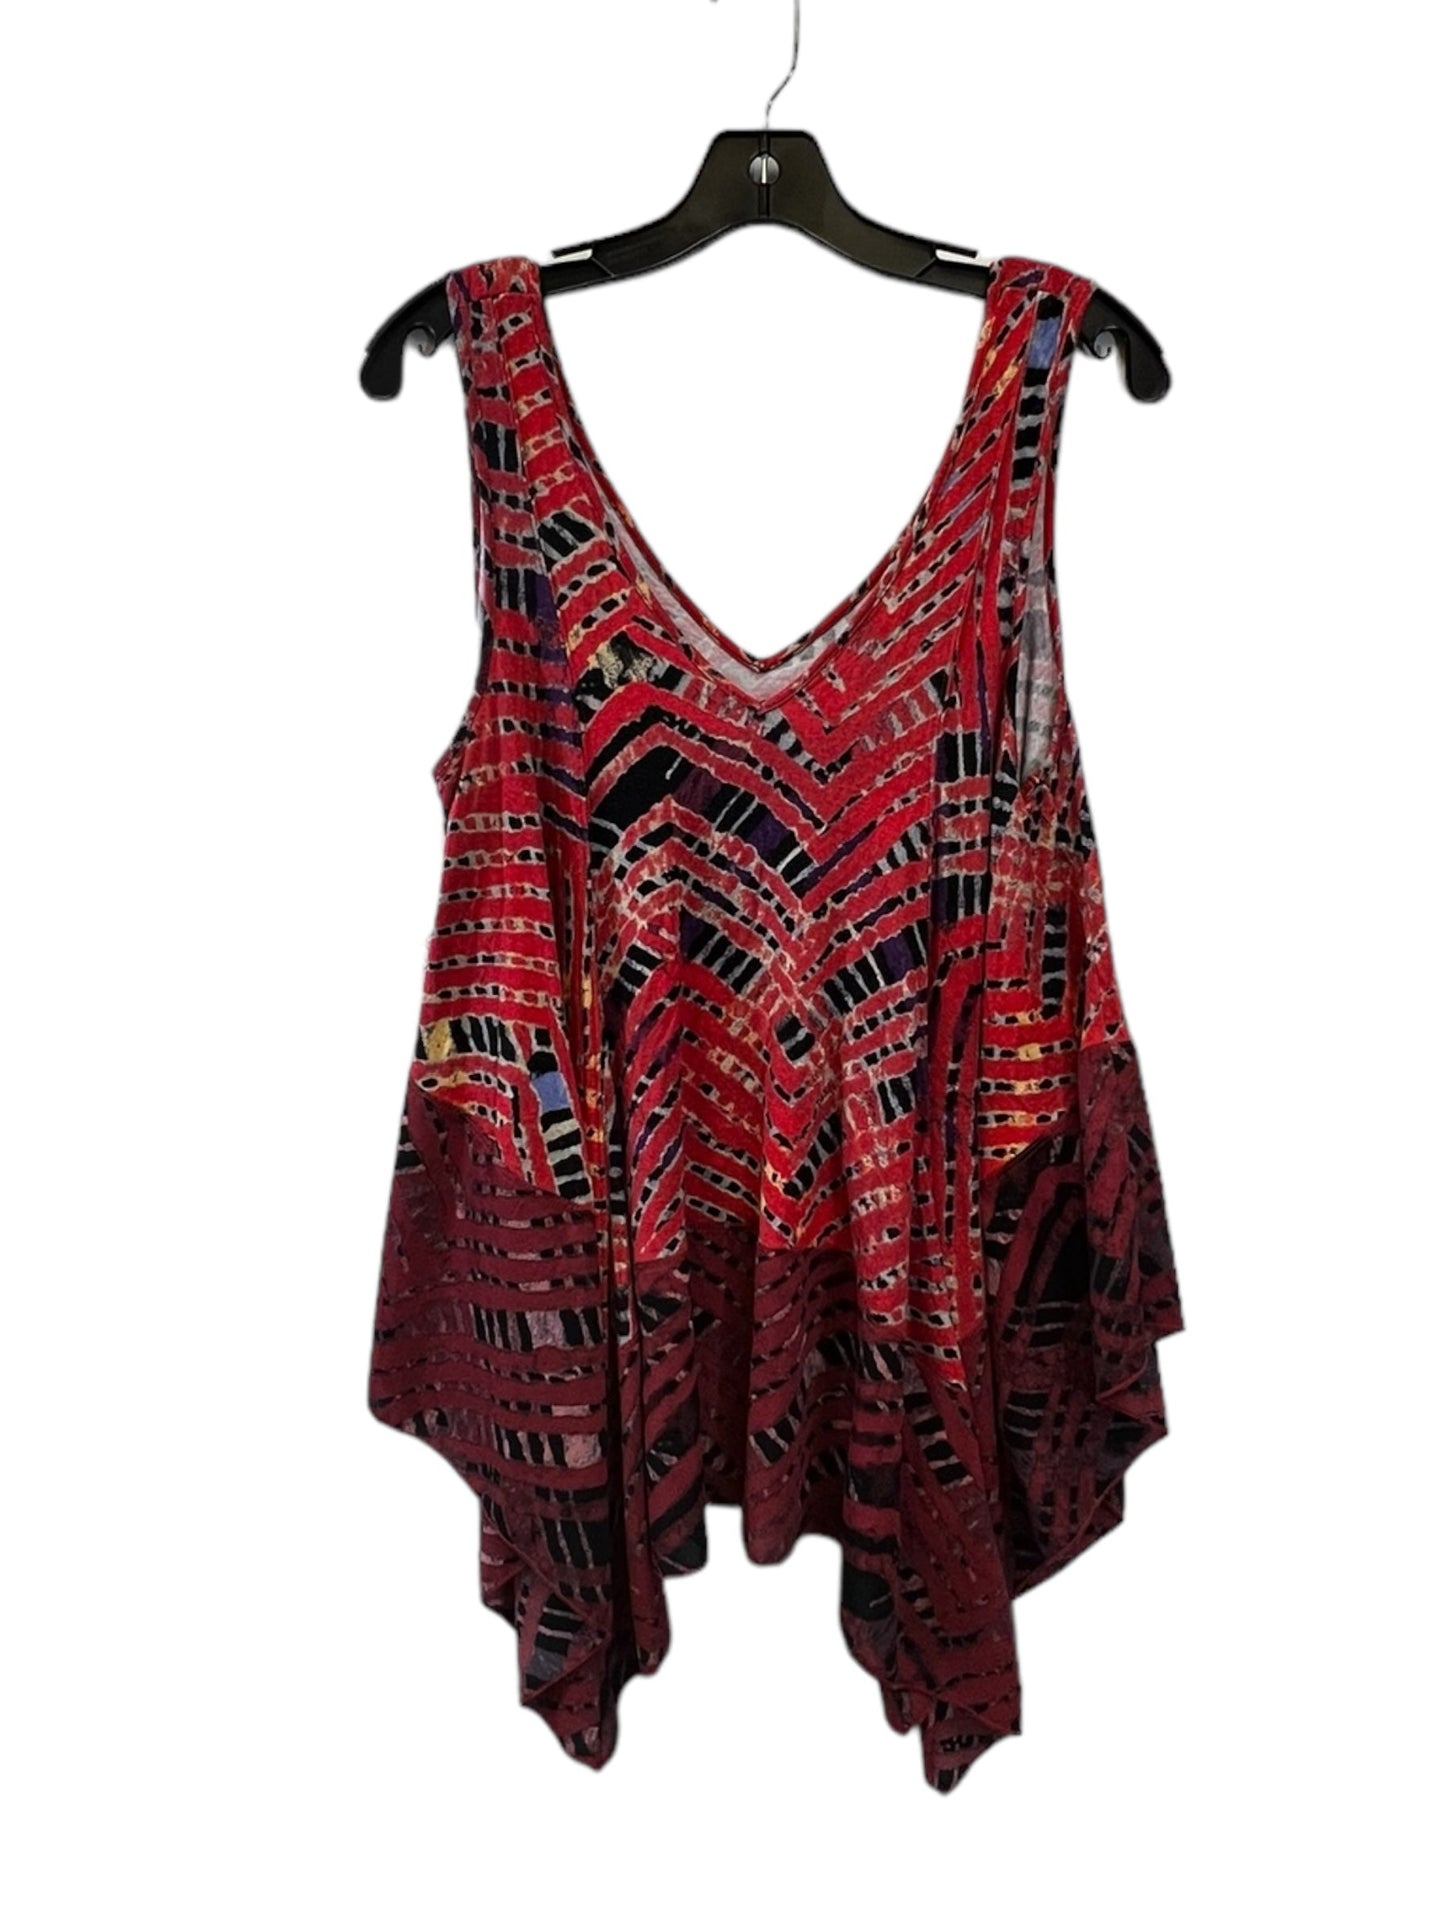 Black & Red Top Sleeveless Free People, Size Xs